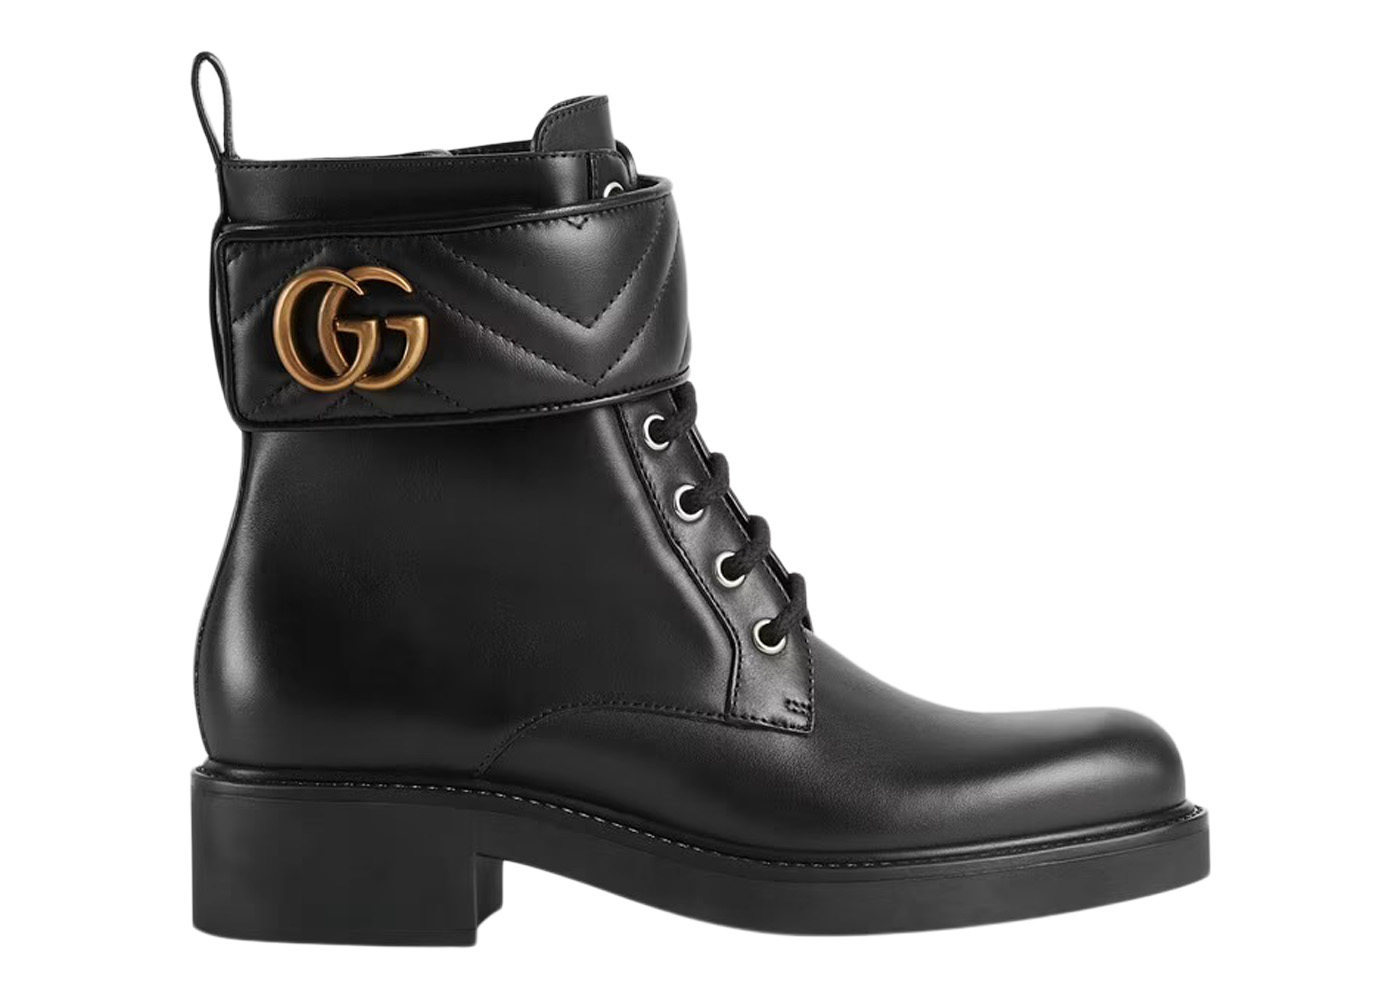 Gucci Double G 40mm Ankle Boot Black Leather - 670397 17K20 1000 - US